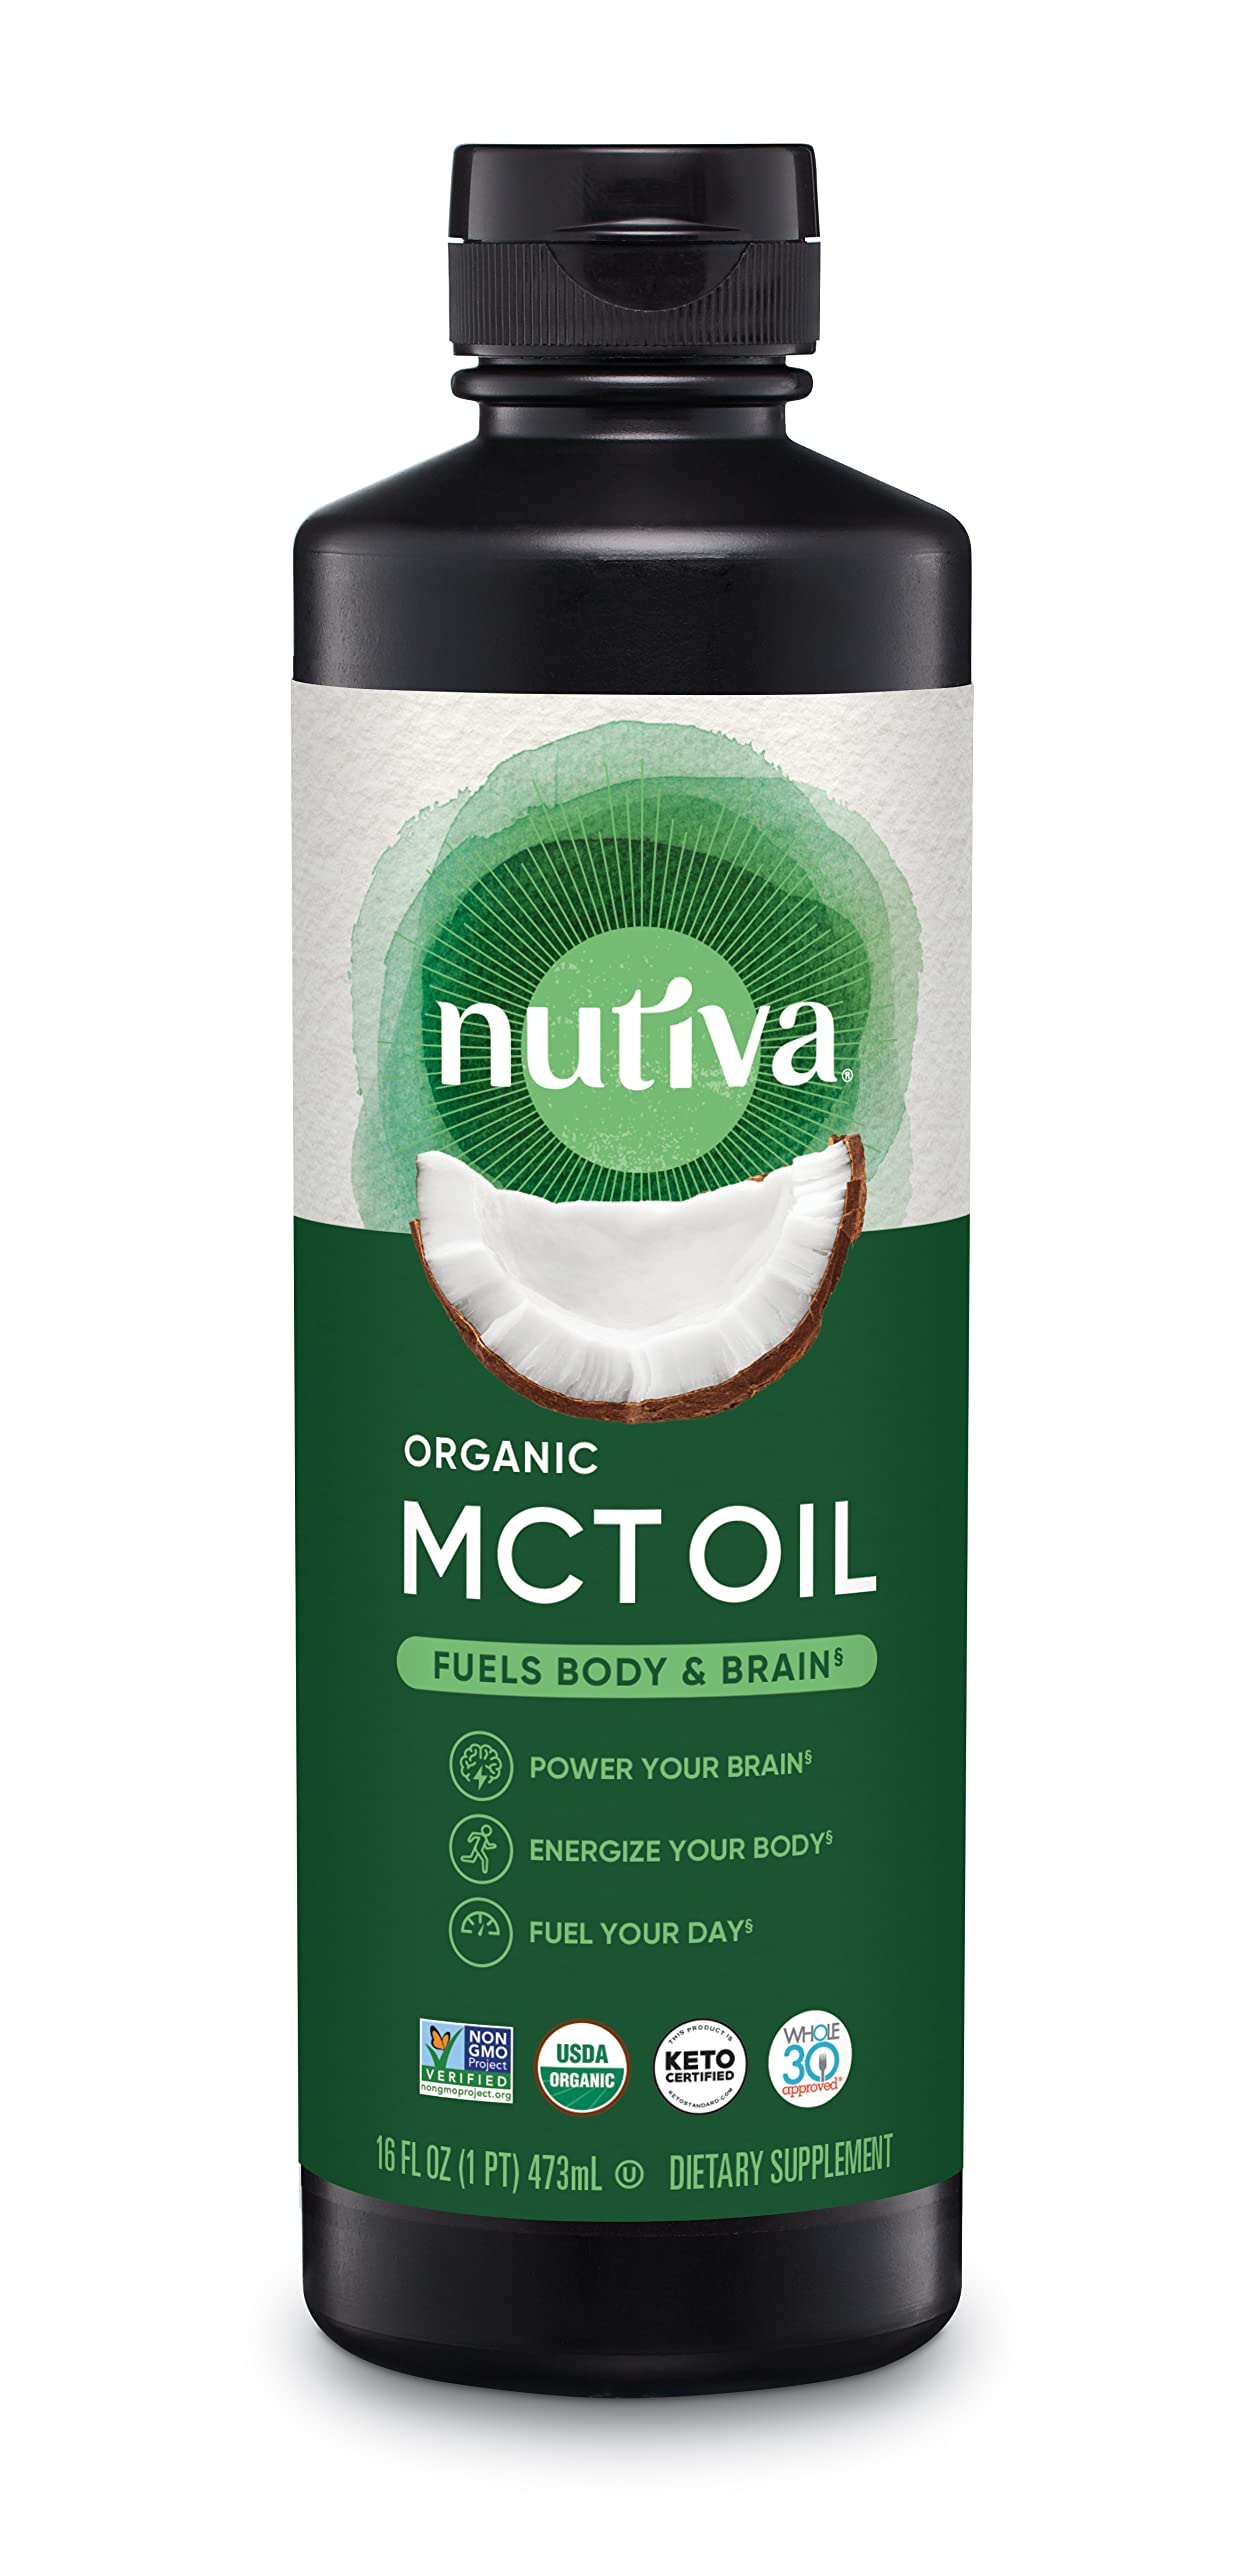 Nutiva Organic MCT Oil, 16 fl oz, Unflavored for Keto Coffee, Non-GMO Oil made from Organic Coconuts, Keto Friendly, Best MCT Oil Wellness Ketosis Supplement, 14g of C8 & C10 per serving